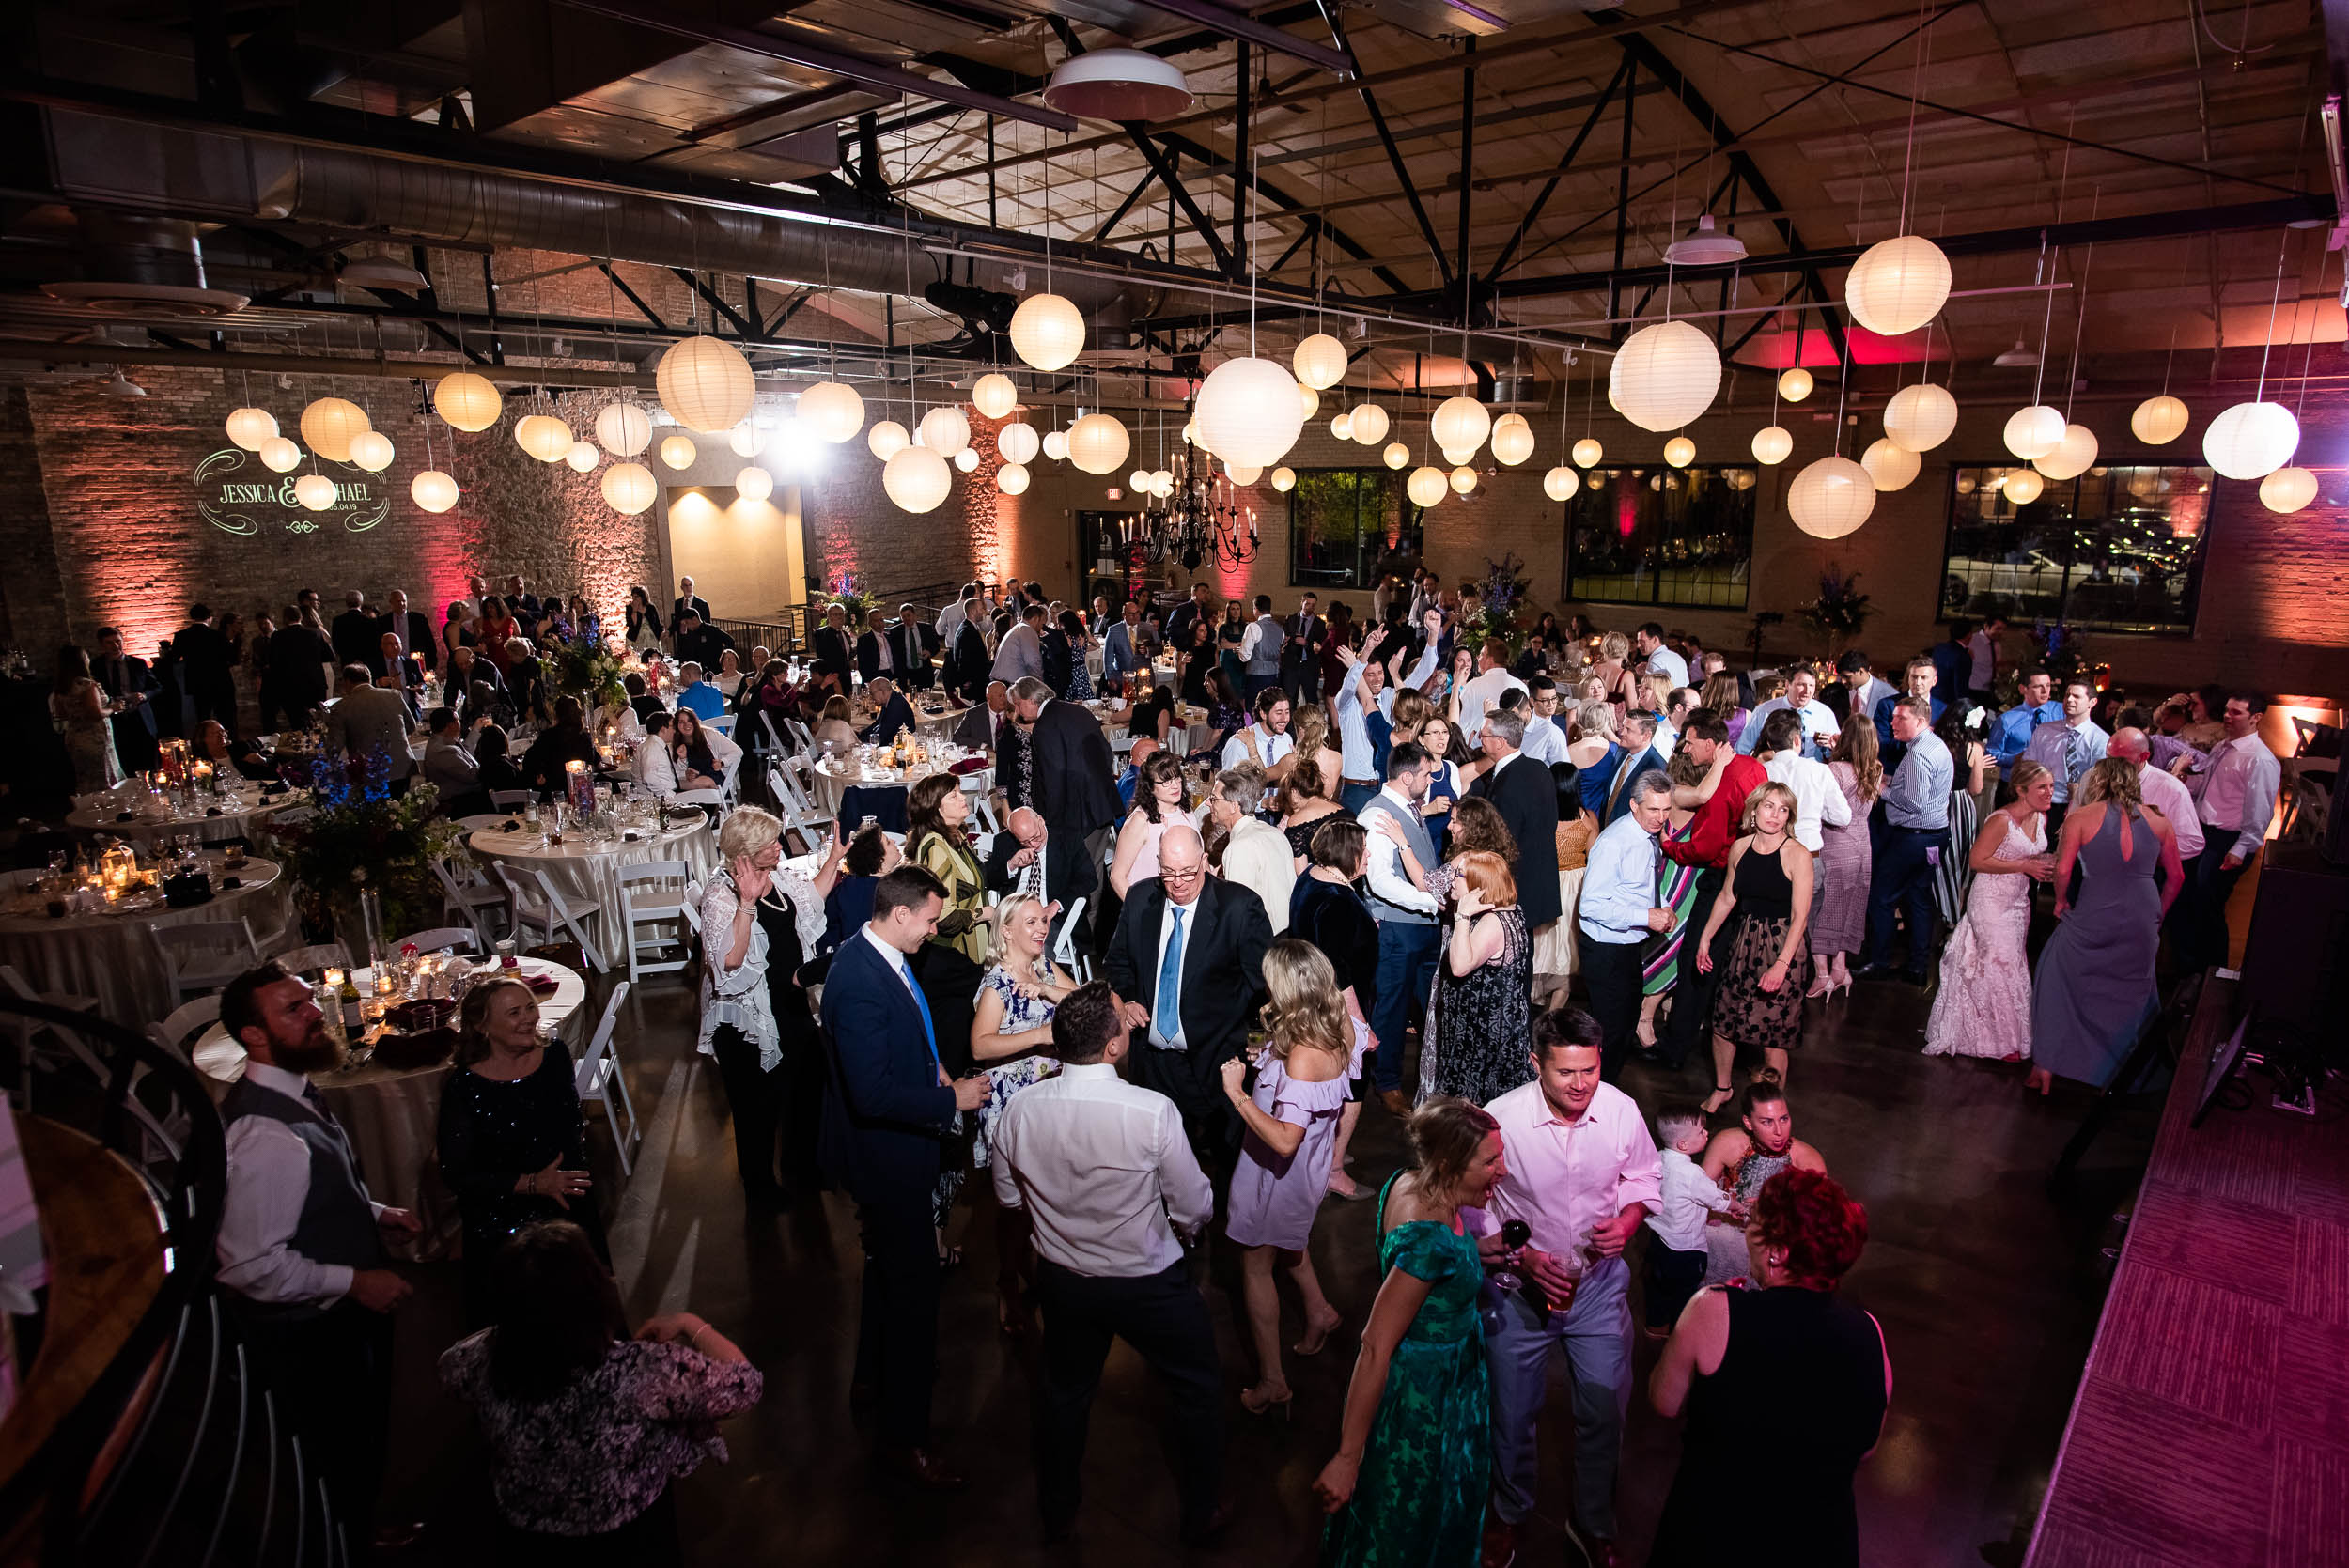 Brewhouse wedding celebration: Modern industrial Chicago wedding inside Prairie Street Brewhouse captured by J. Brown Photography. Find more wedding ideas at jbrownphotography.com!